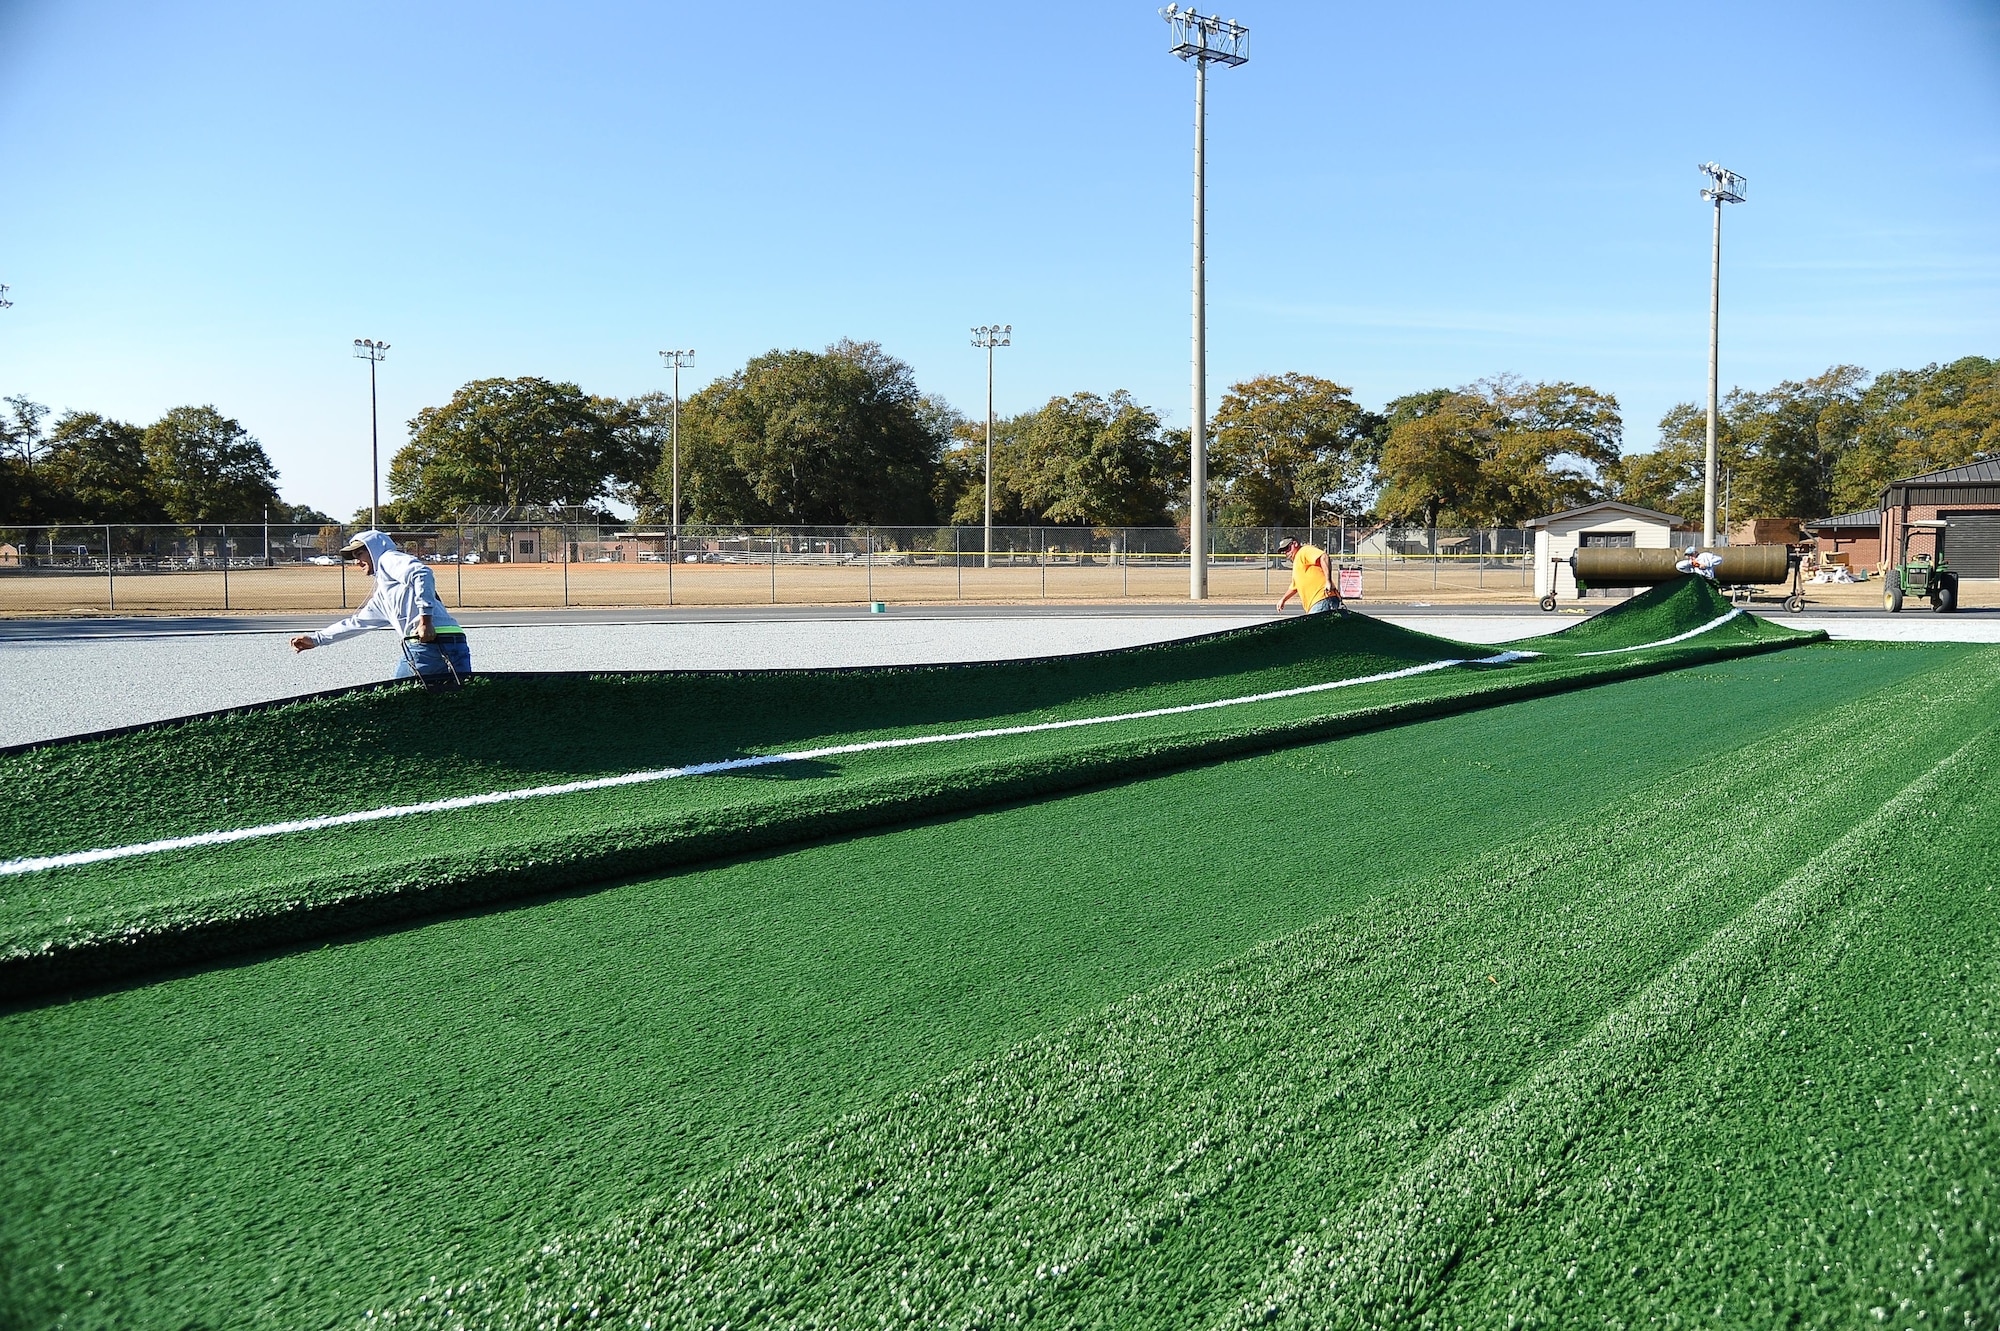 Contractors lay new turf at the base track across from the Fitness Center. The entire area is being reconstructed and is scheduled to be complete around the beginning of the new year. (U.S. Air Force photo by Misuzu Allen)